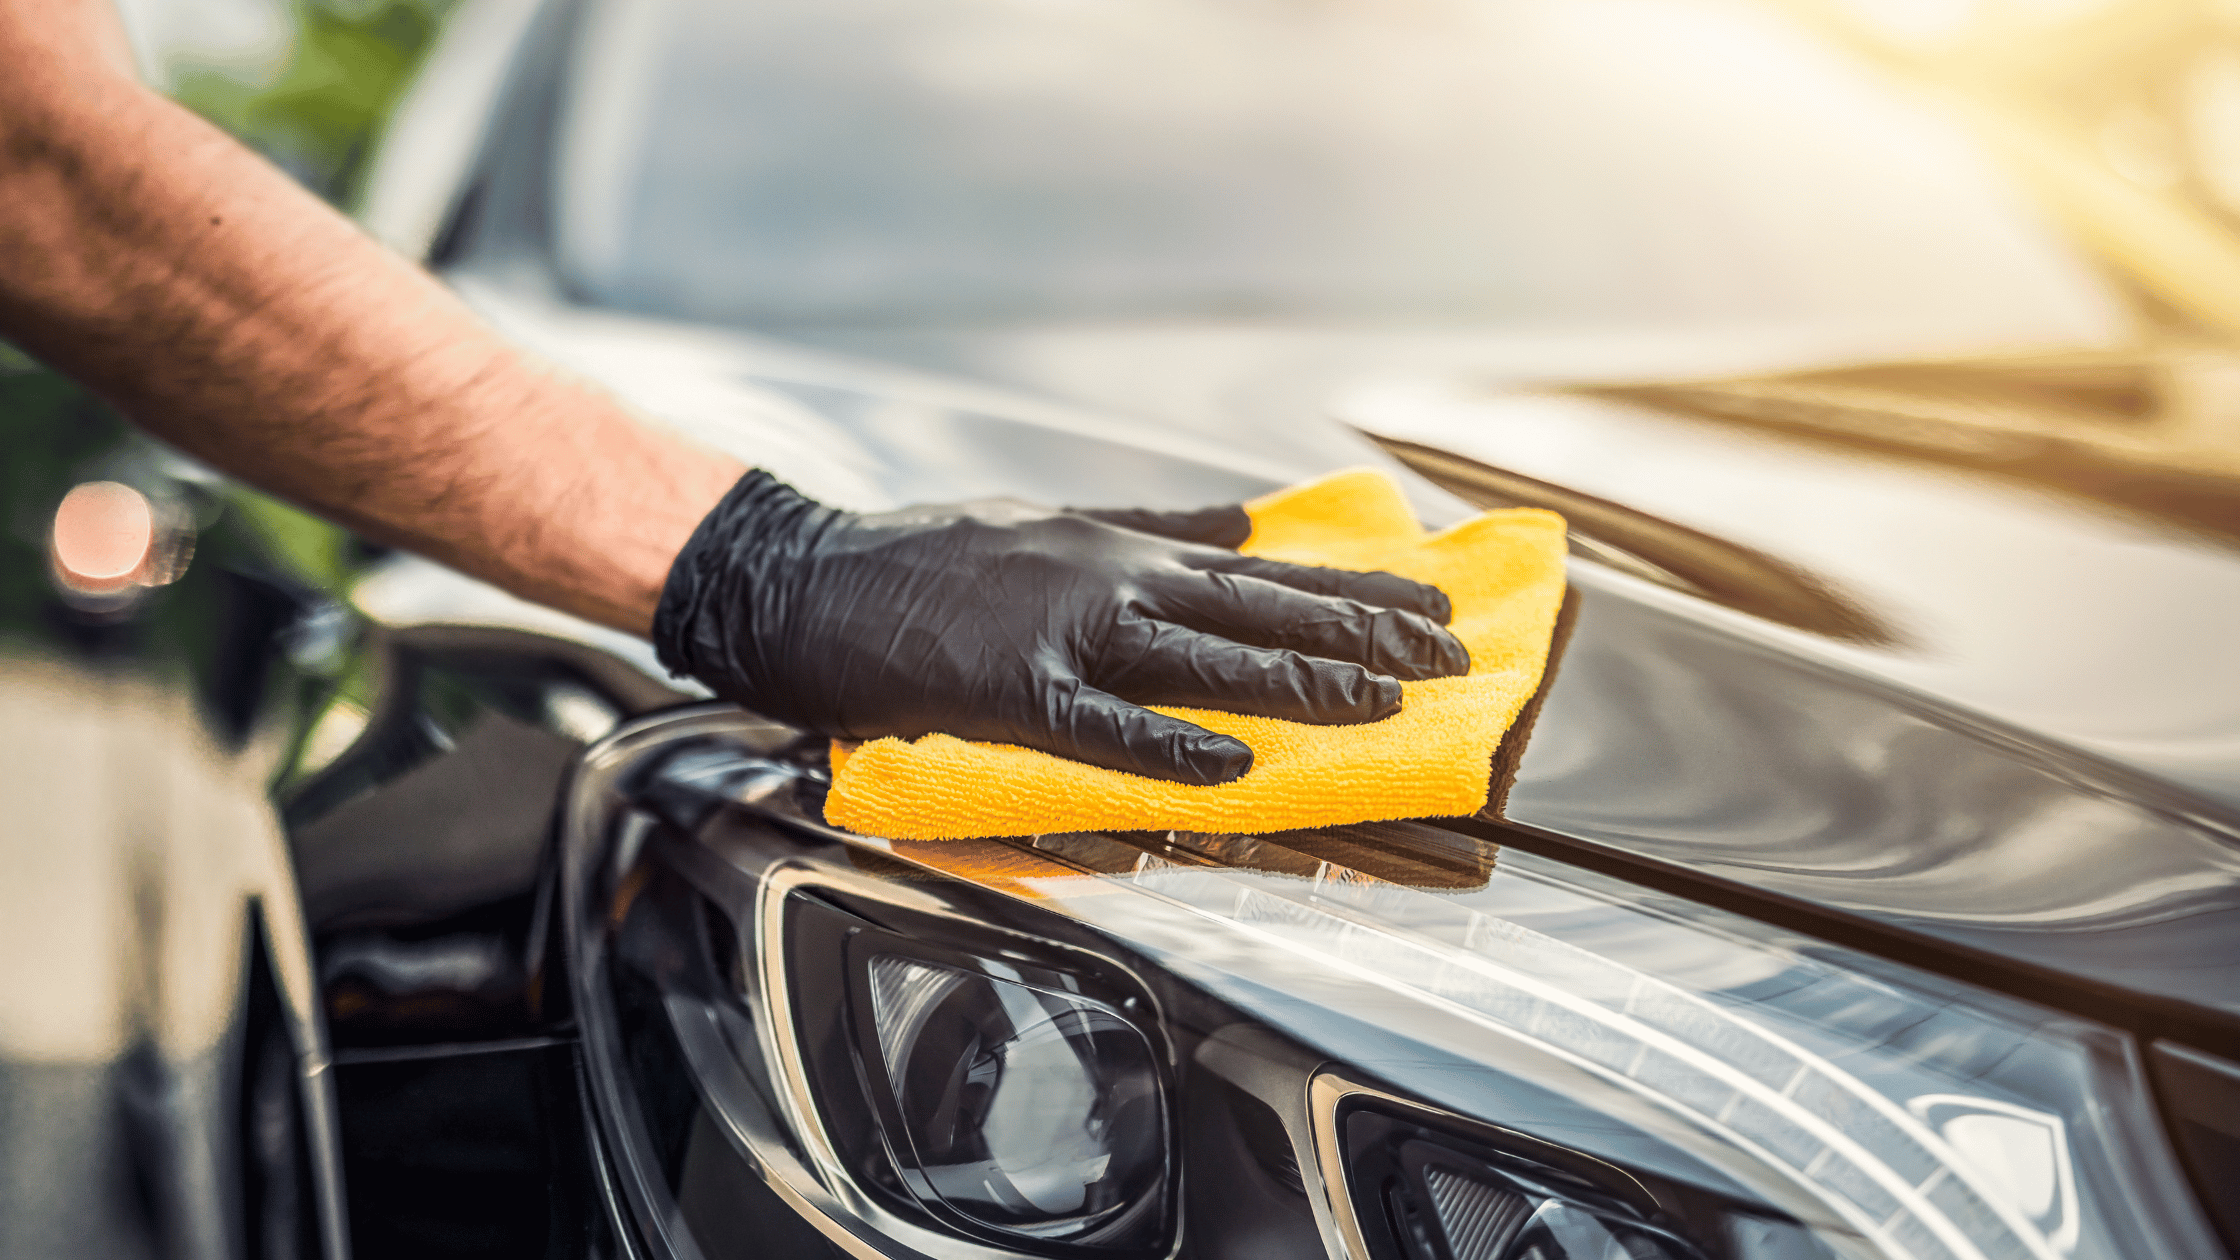 Auto Exterior Cleaning